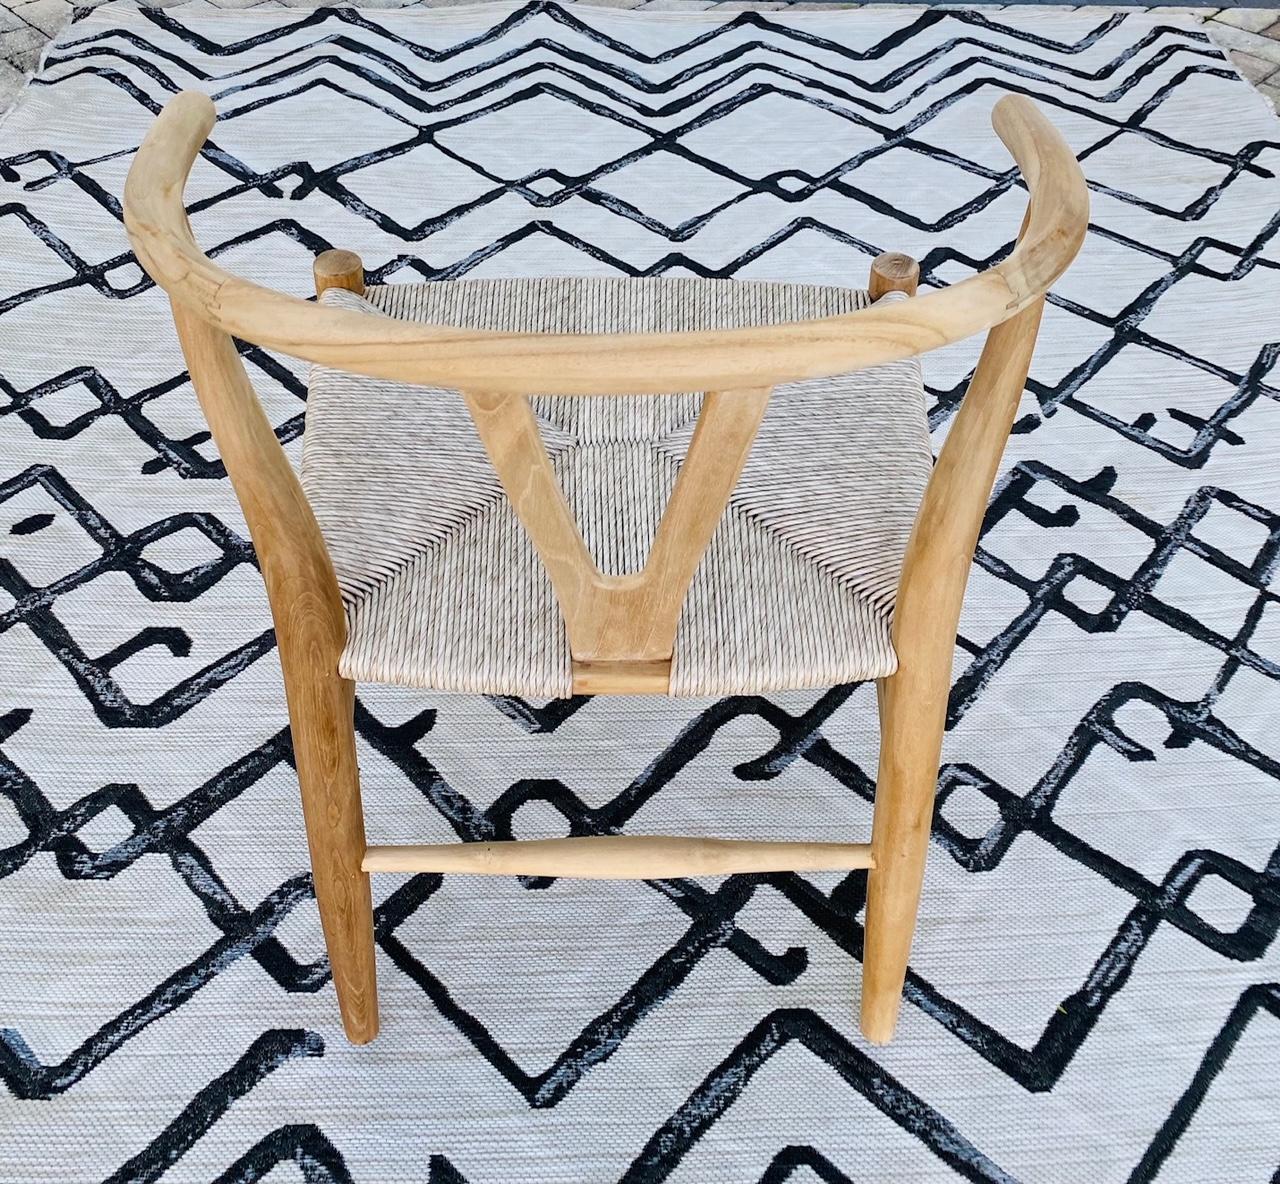 Contemporary Vintage Danish Modern Chair in Natural Teak Wood with Handwoven Seat